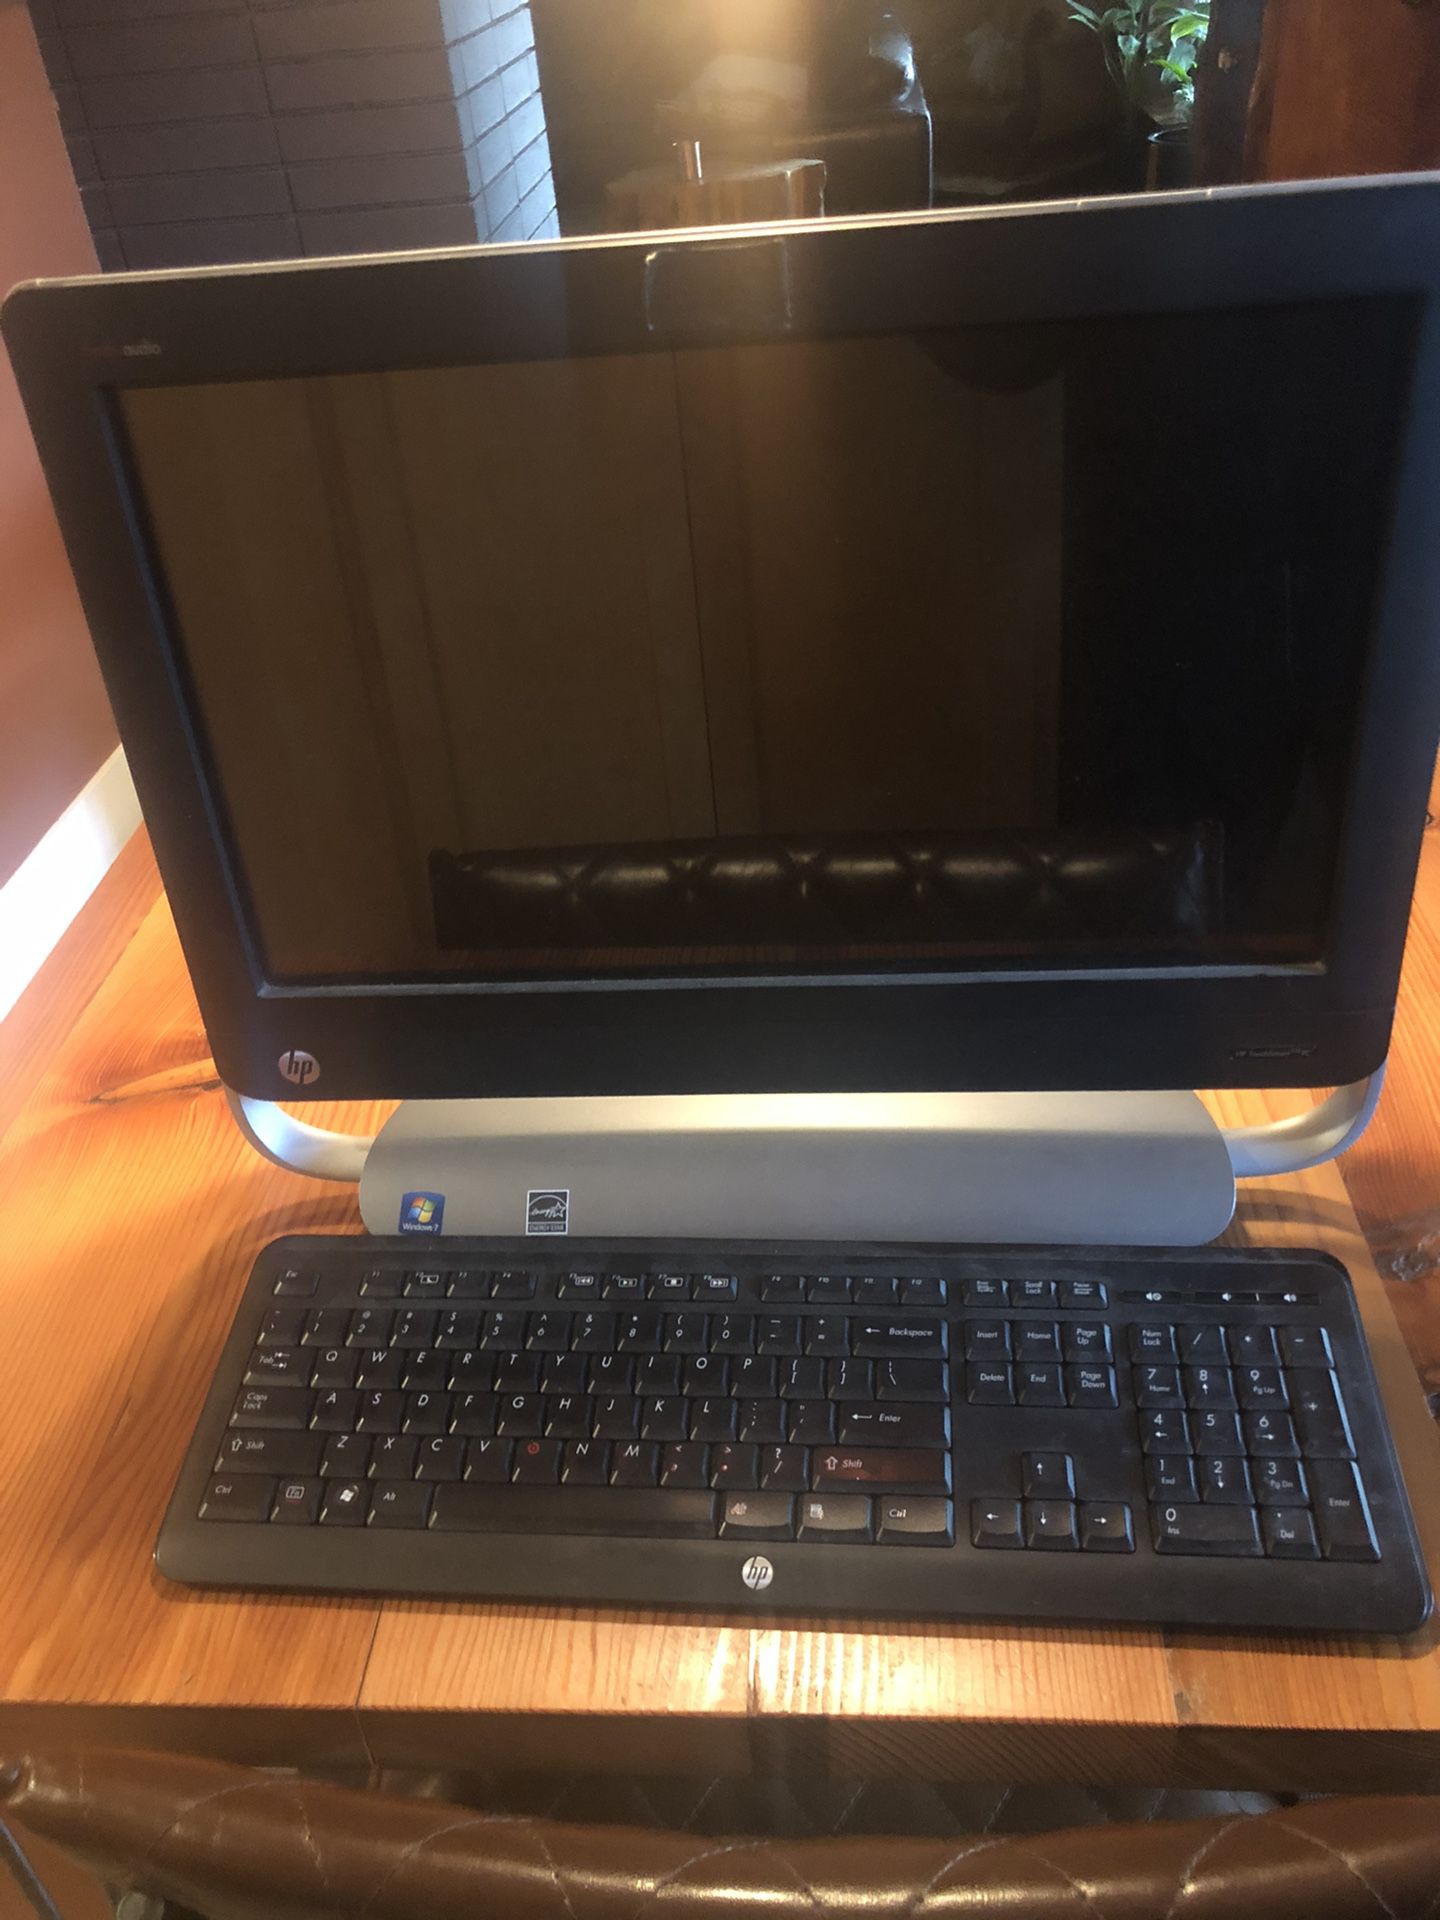 HP Touchsmart all in one 320 PC computer